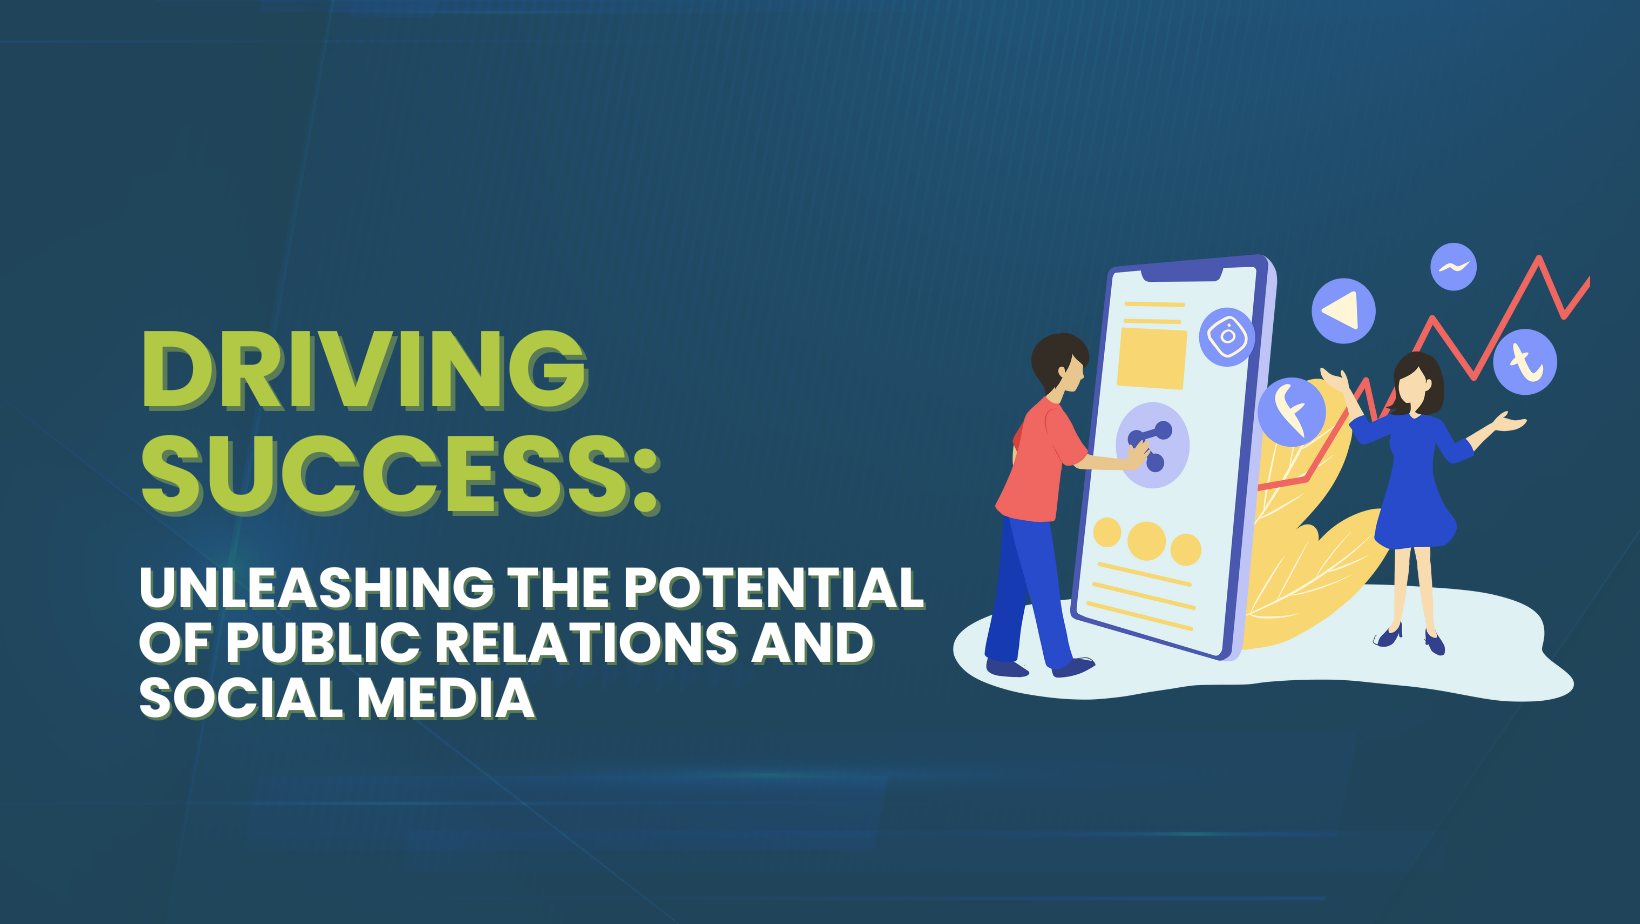 Driving Success: Unleashing the Potential of Public Relations and Social Media